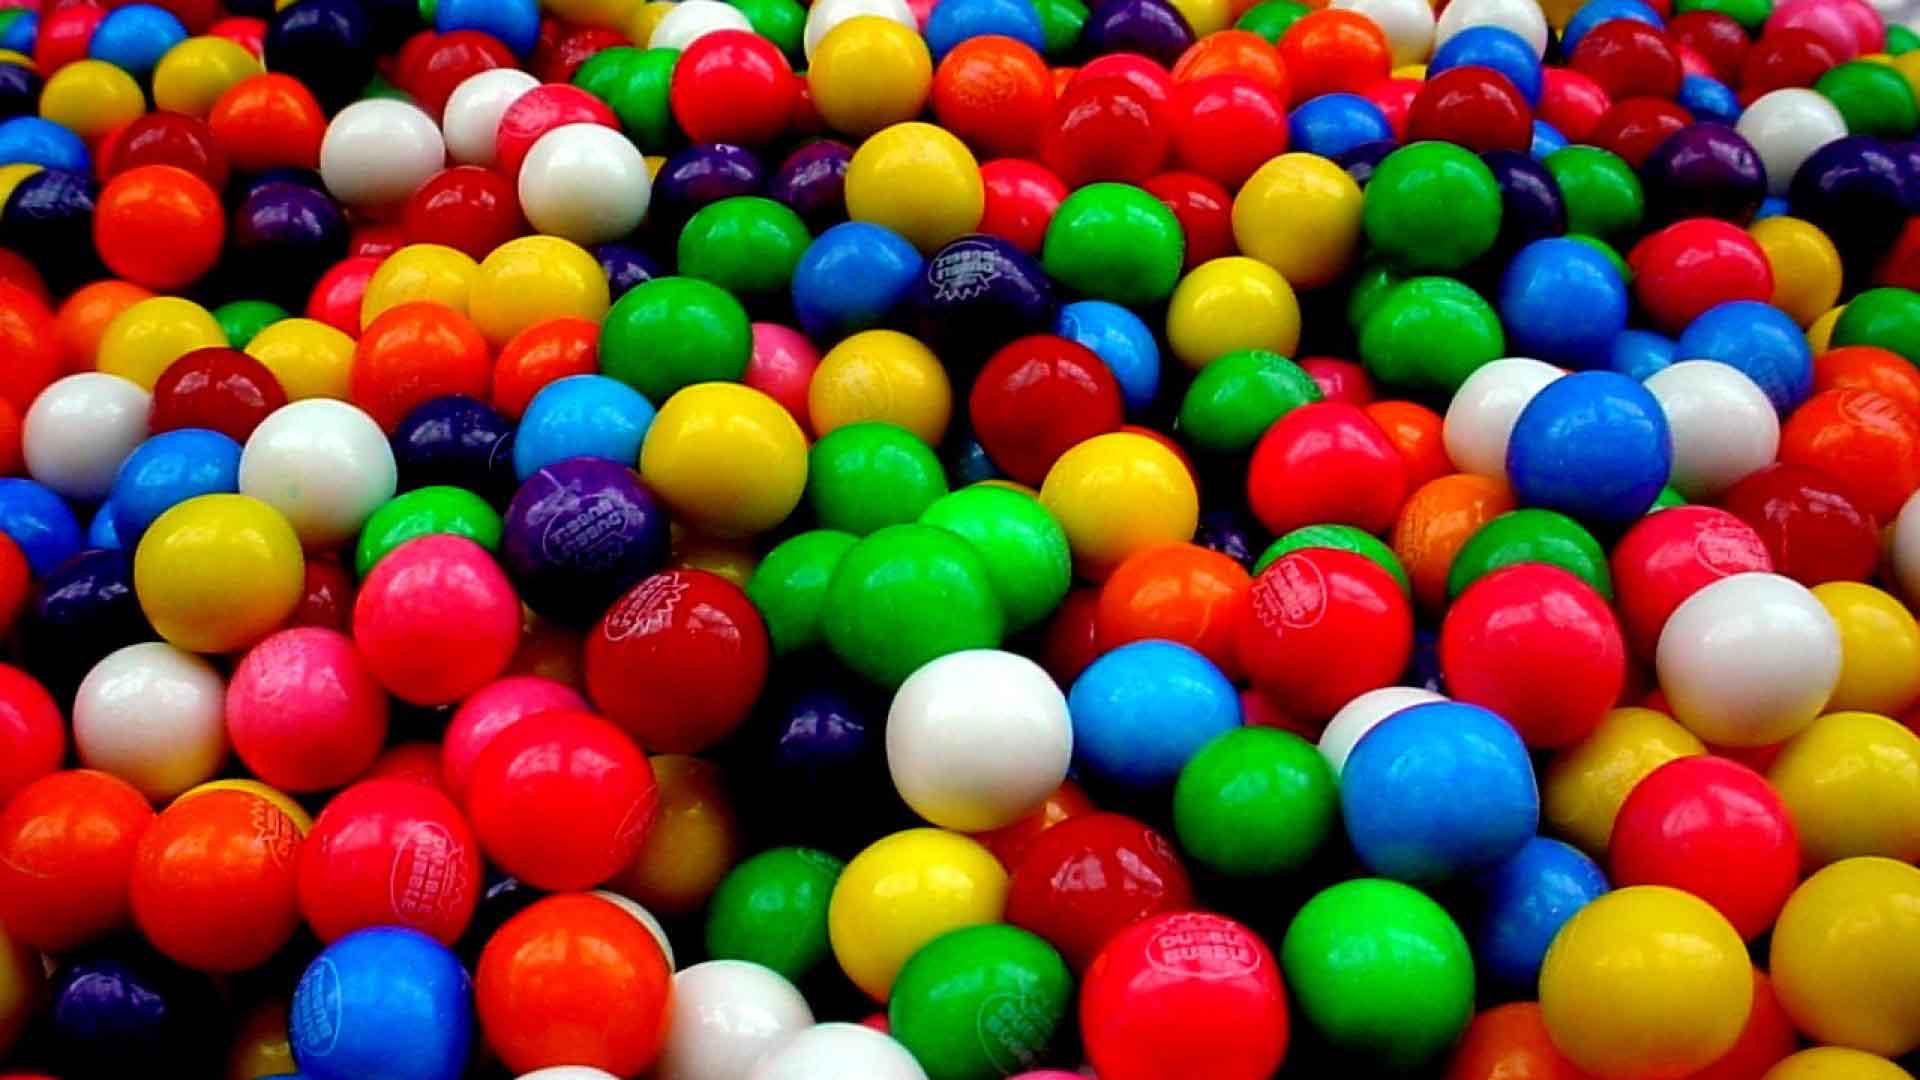 Sweet Candies Latest Hd Wallpapers Free Download - Bubble Gum - HD Wallpaper 